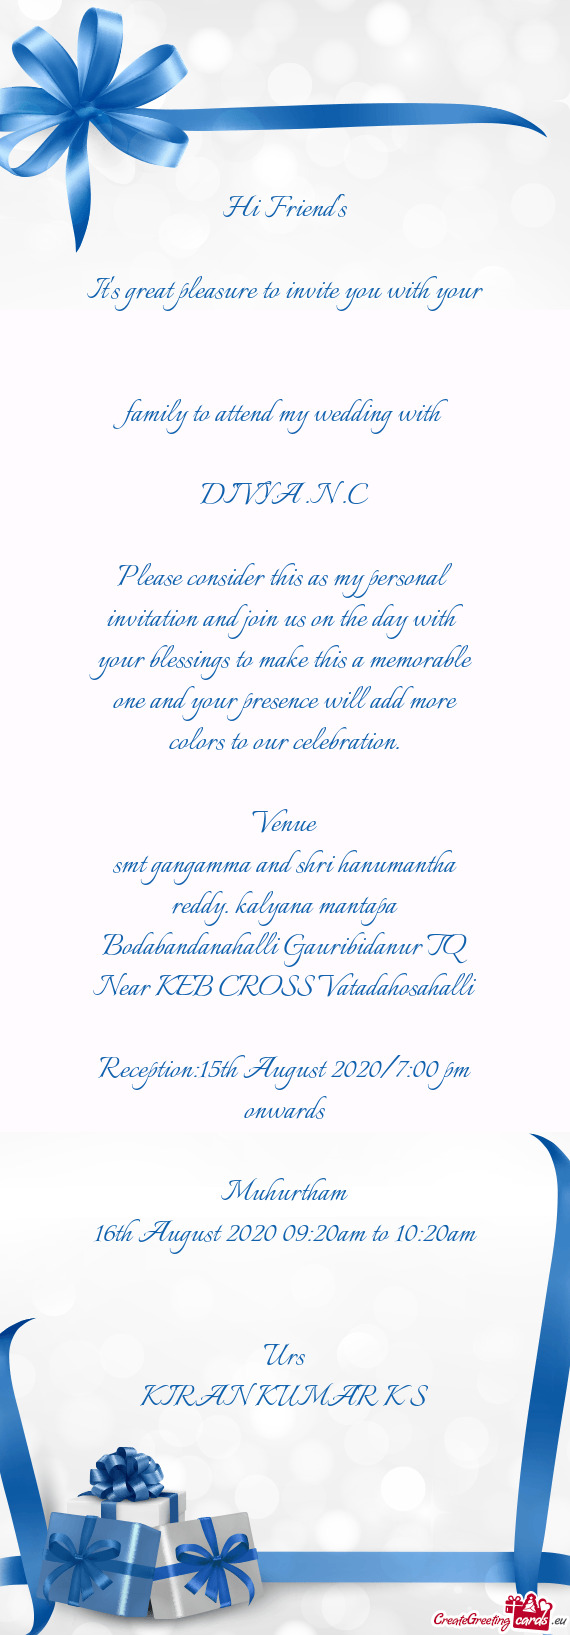 Reception:15th August 2020/7:00 pm onwards